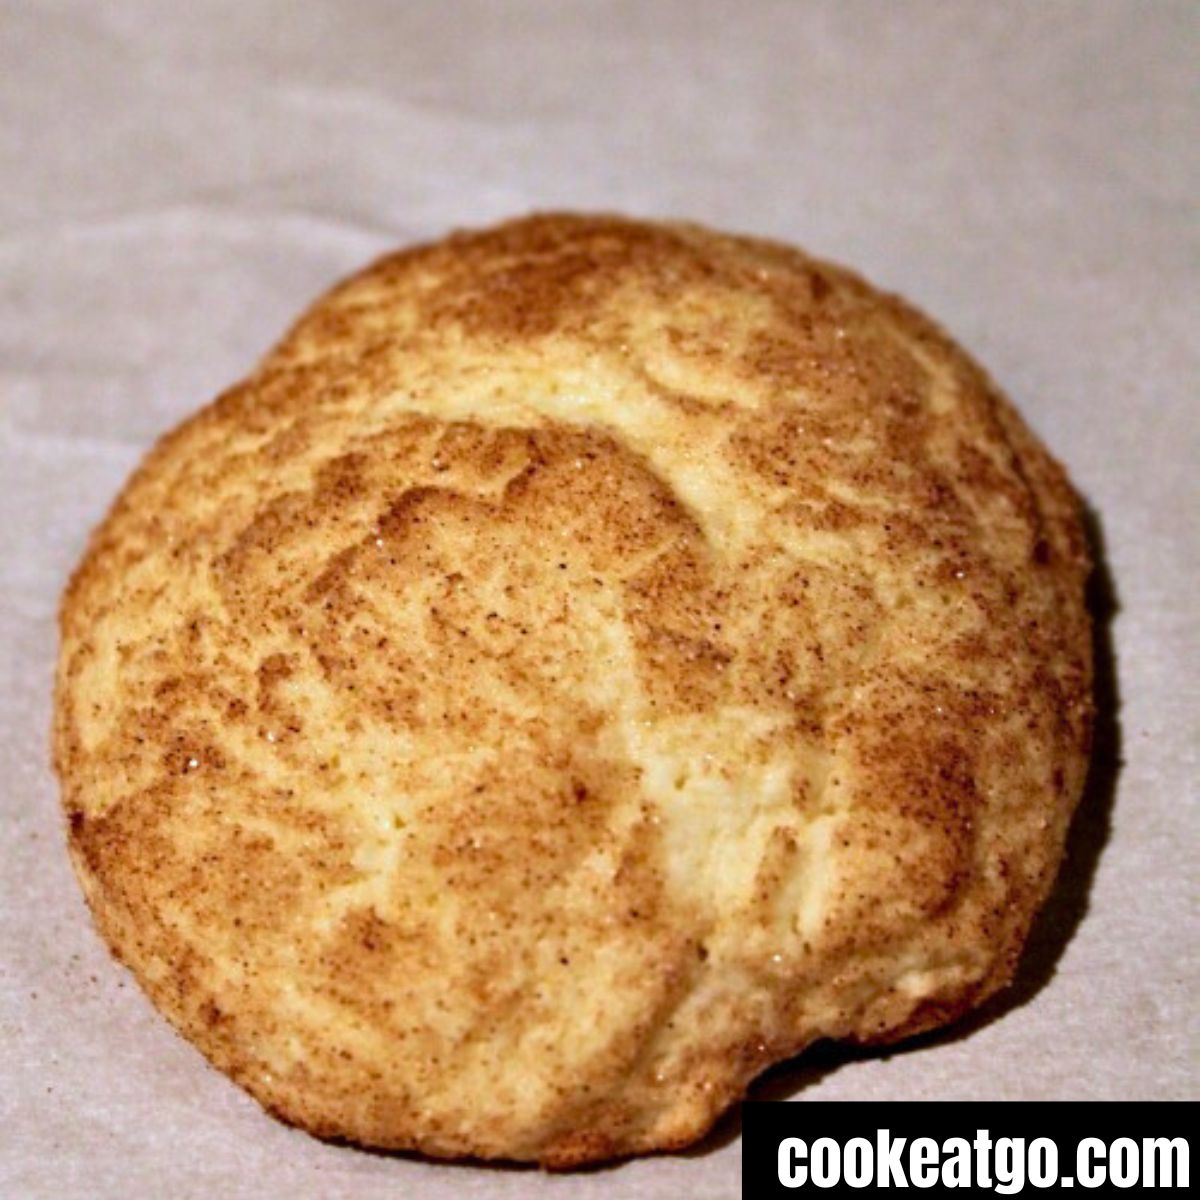 Snicker Doodle Cake Mix Cookie on a wax paper